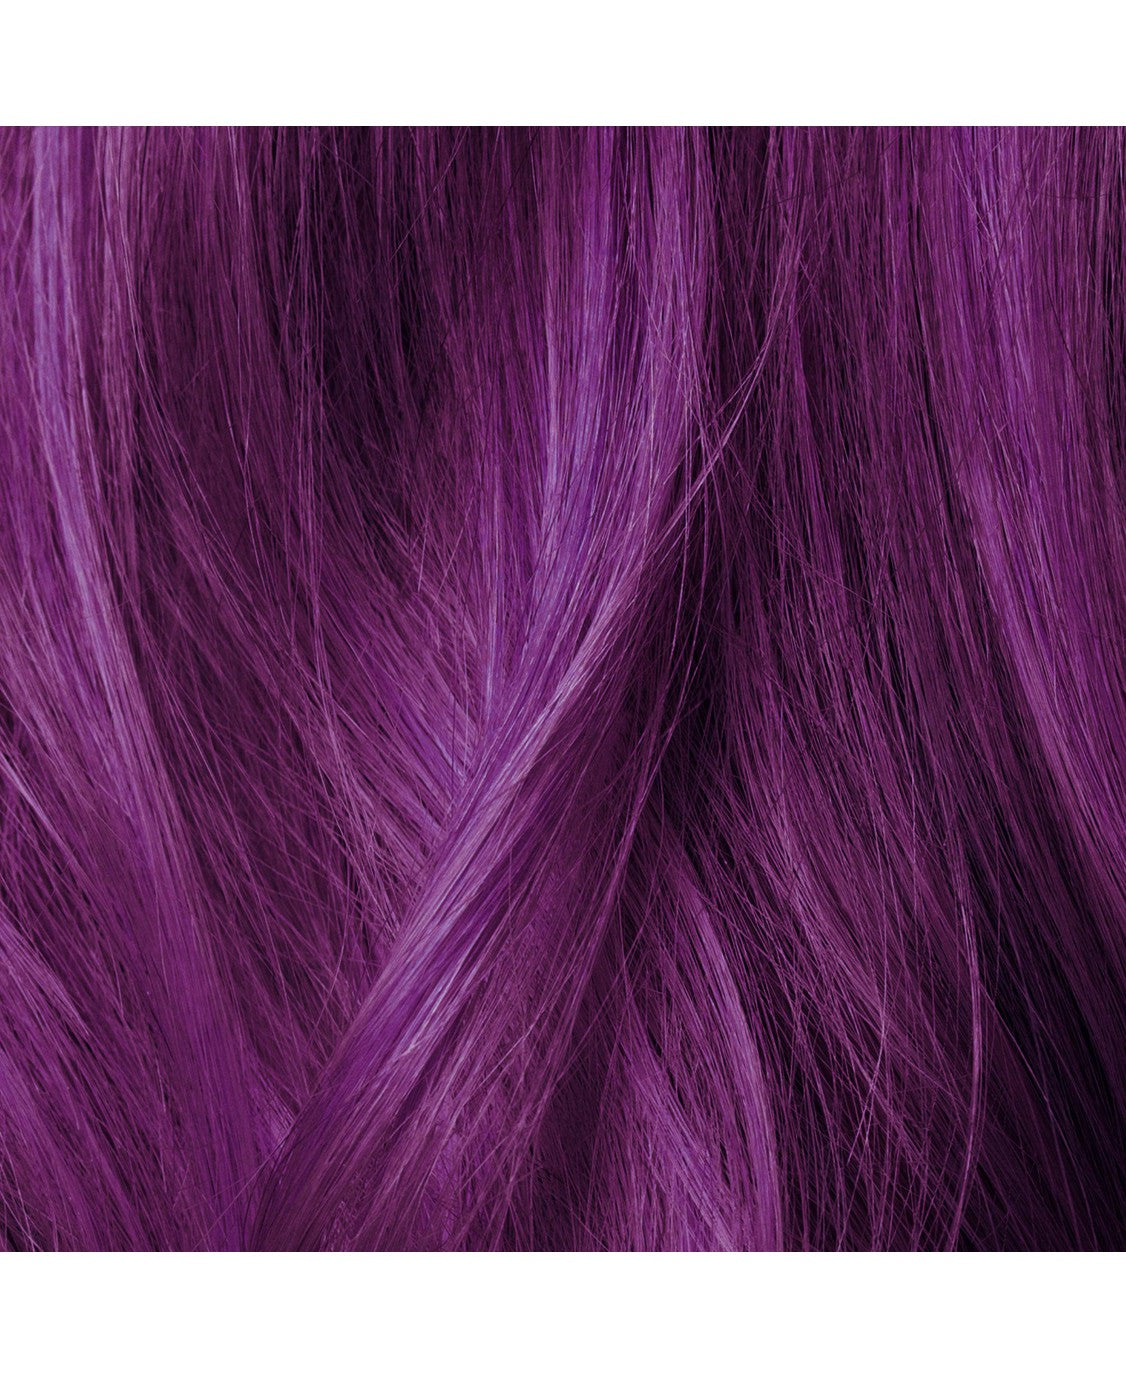 Hair, Eye, Purple, Violet, Natural material, Liver, Magenta, Tints and shades, Electric blue, Pattern